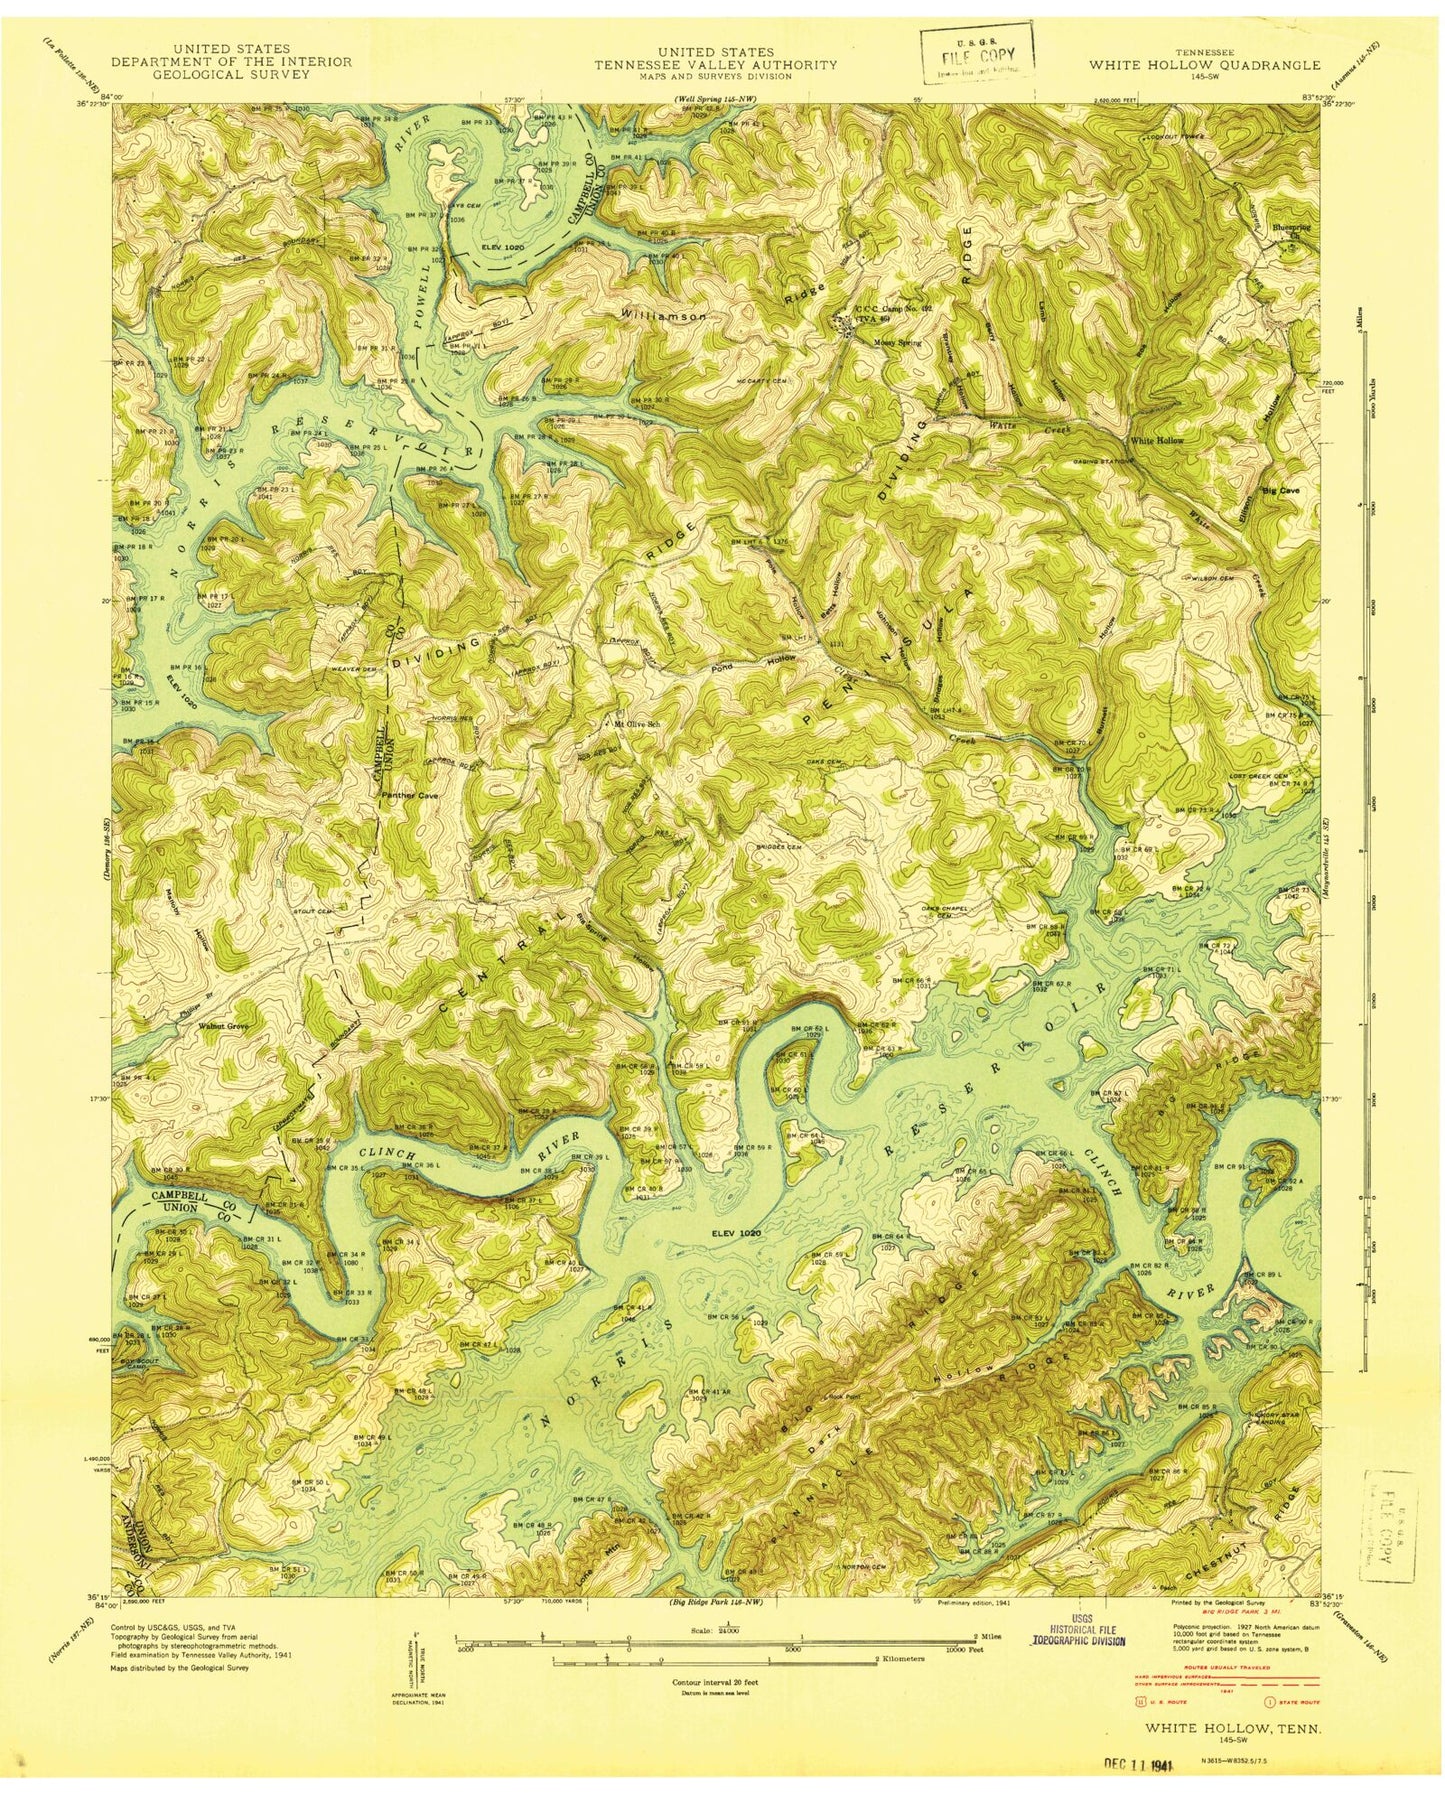 Classic USGS White Hollow Tennessee 7.5'x7.5' Topo Map Image